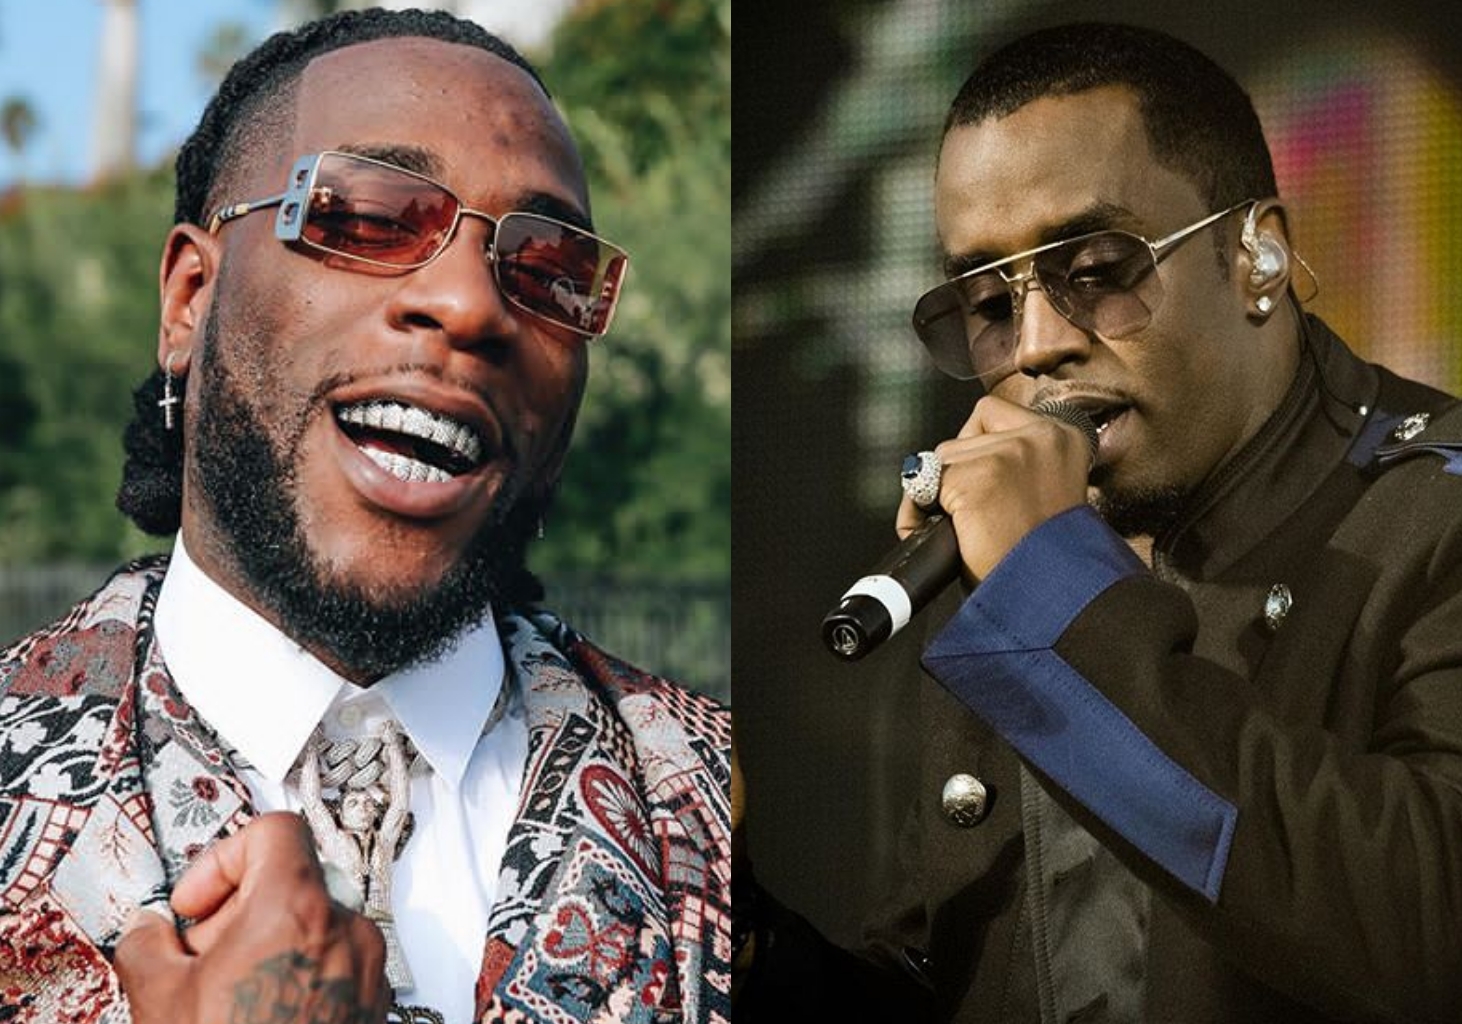 "You're one of the best have ever seen – Diddy celebrates Burna Boy's greatness on IG live chat (Video)